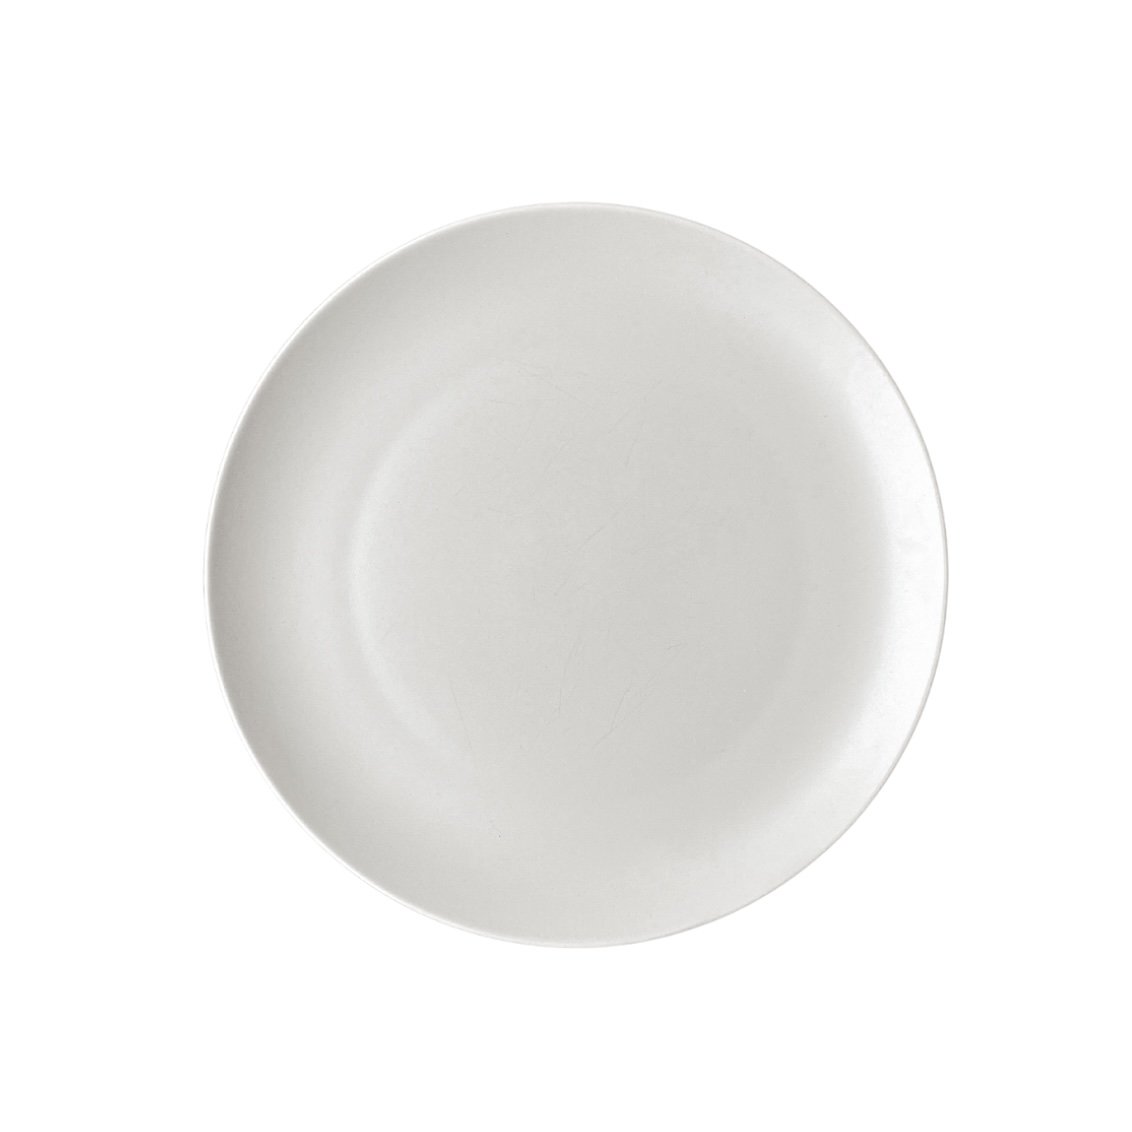 stone dinner plate hire